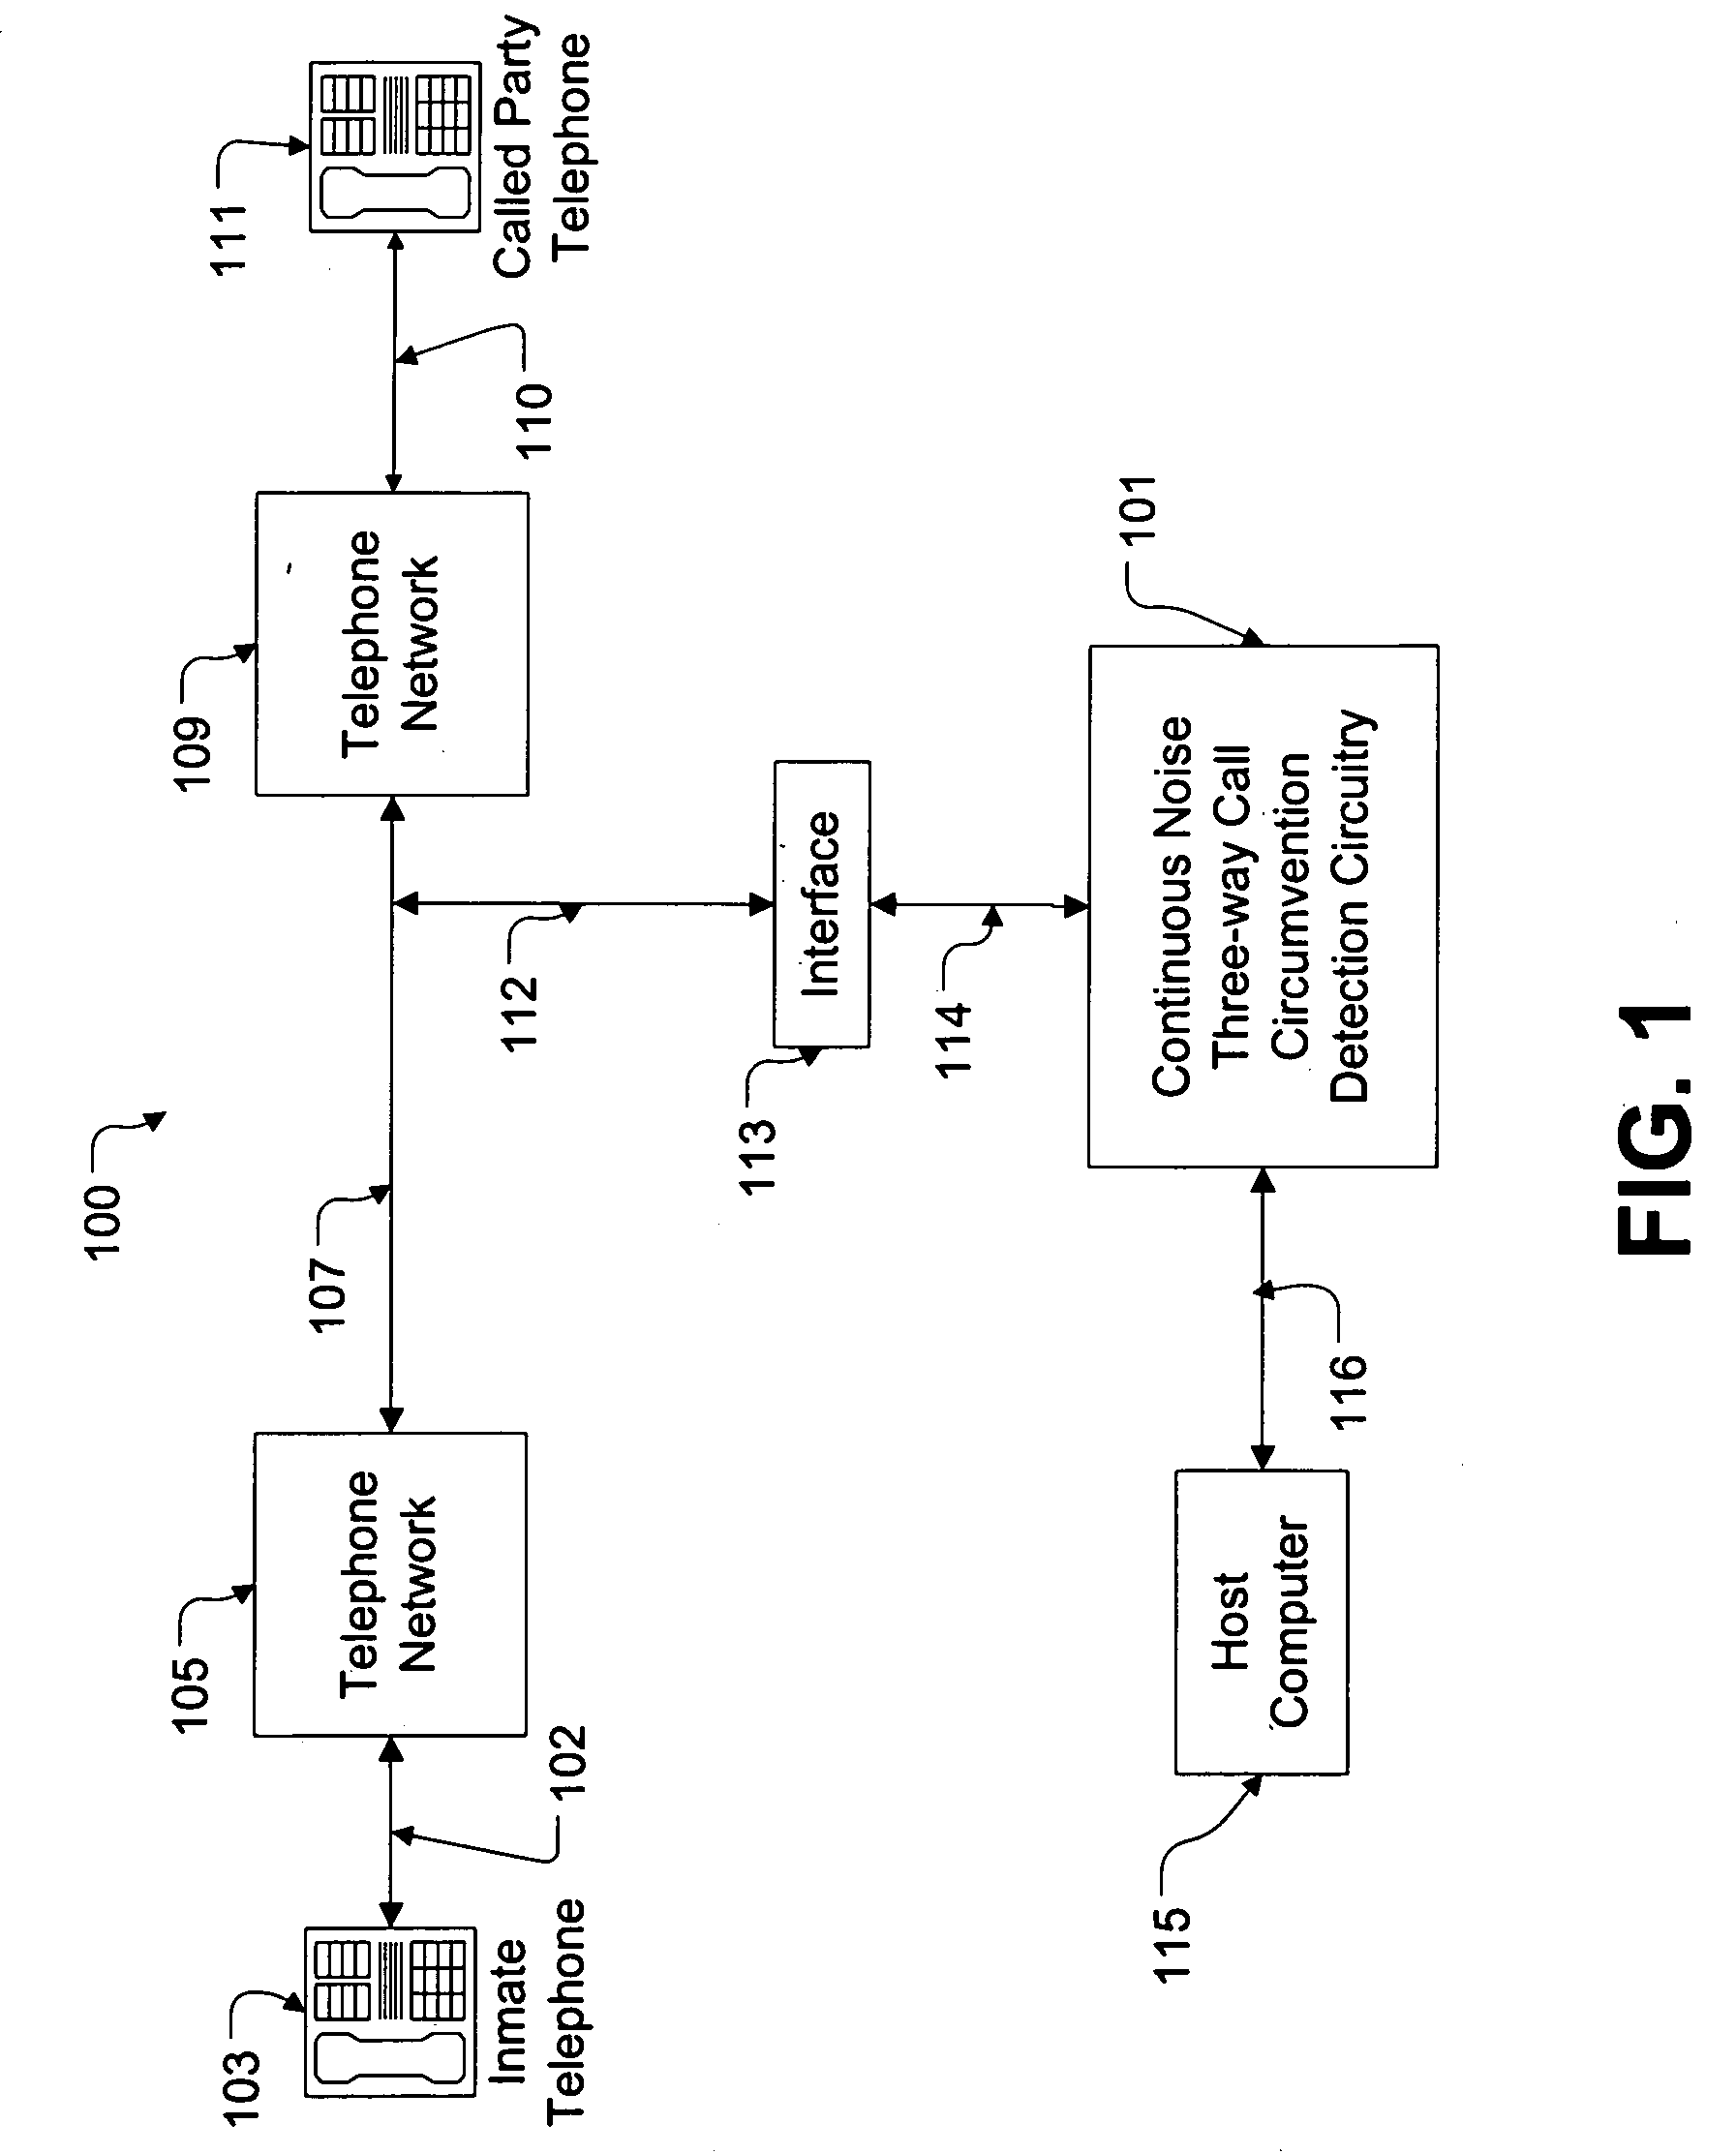 System and method for detecting three-way call circumvention attempts